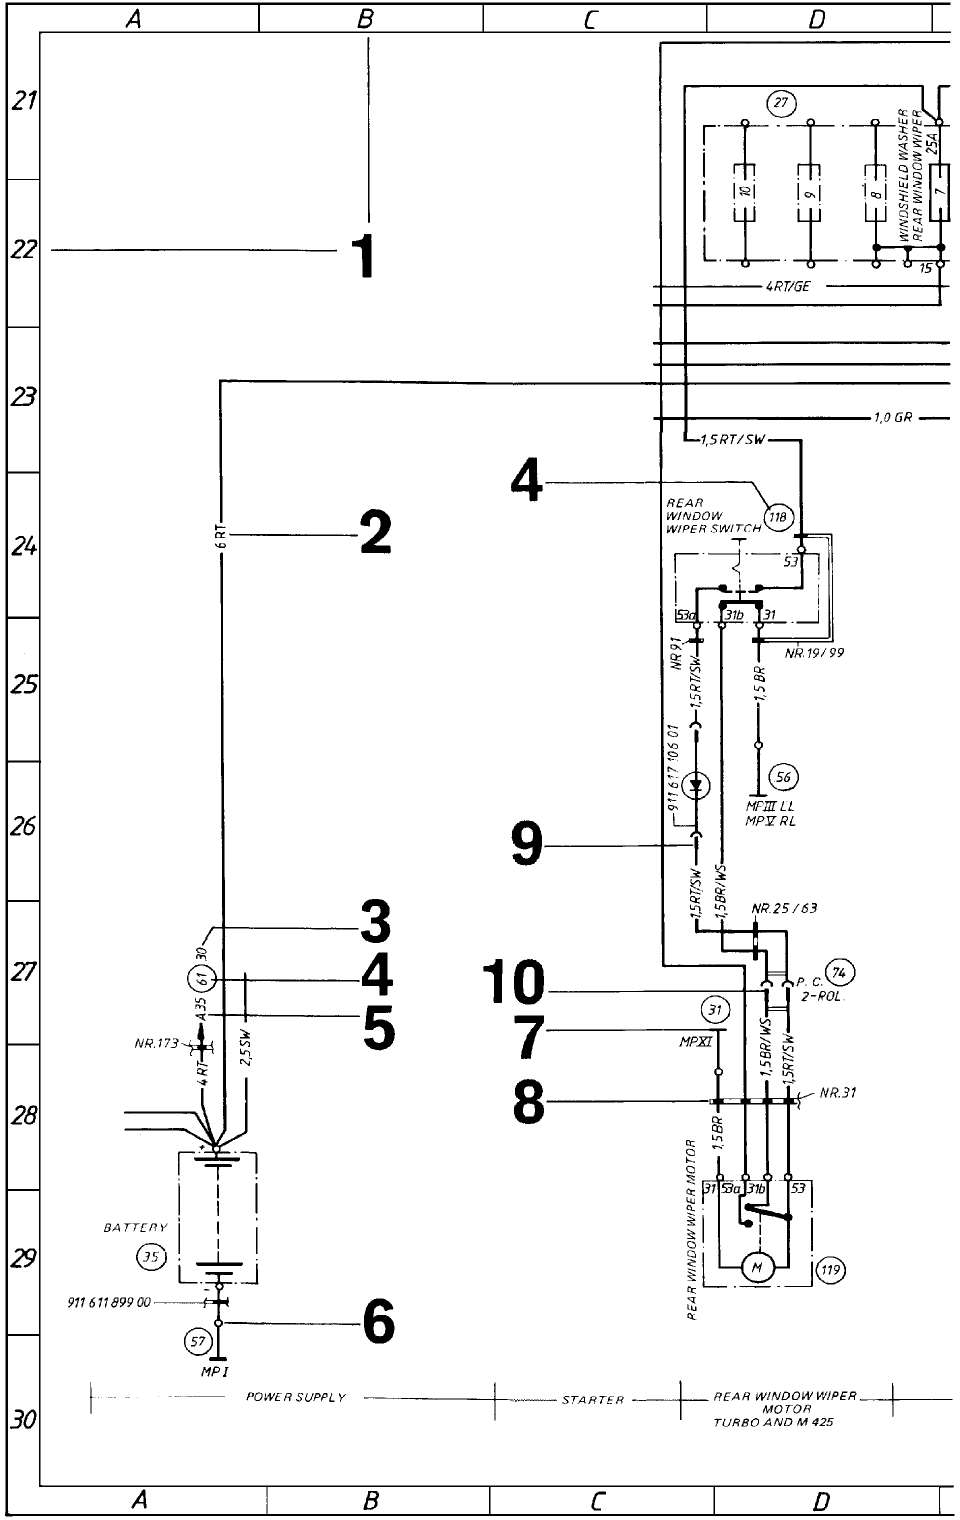 Diagram Information and Instructions